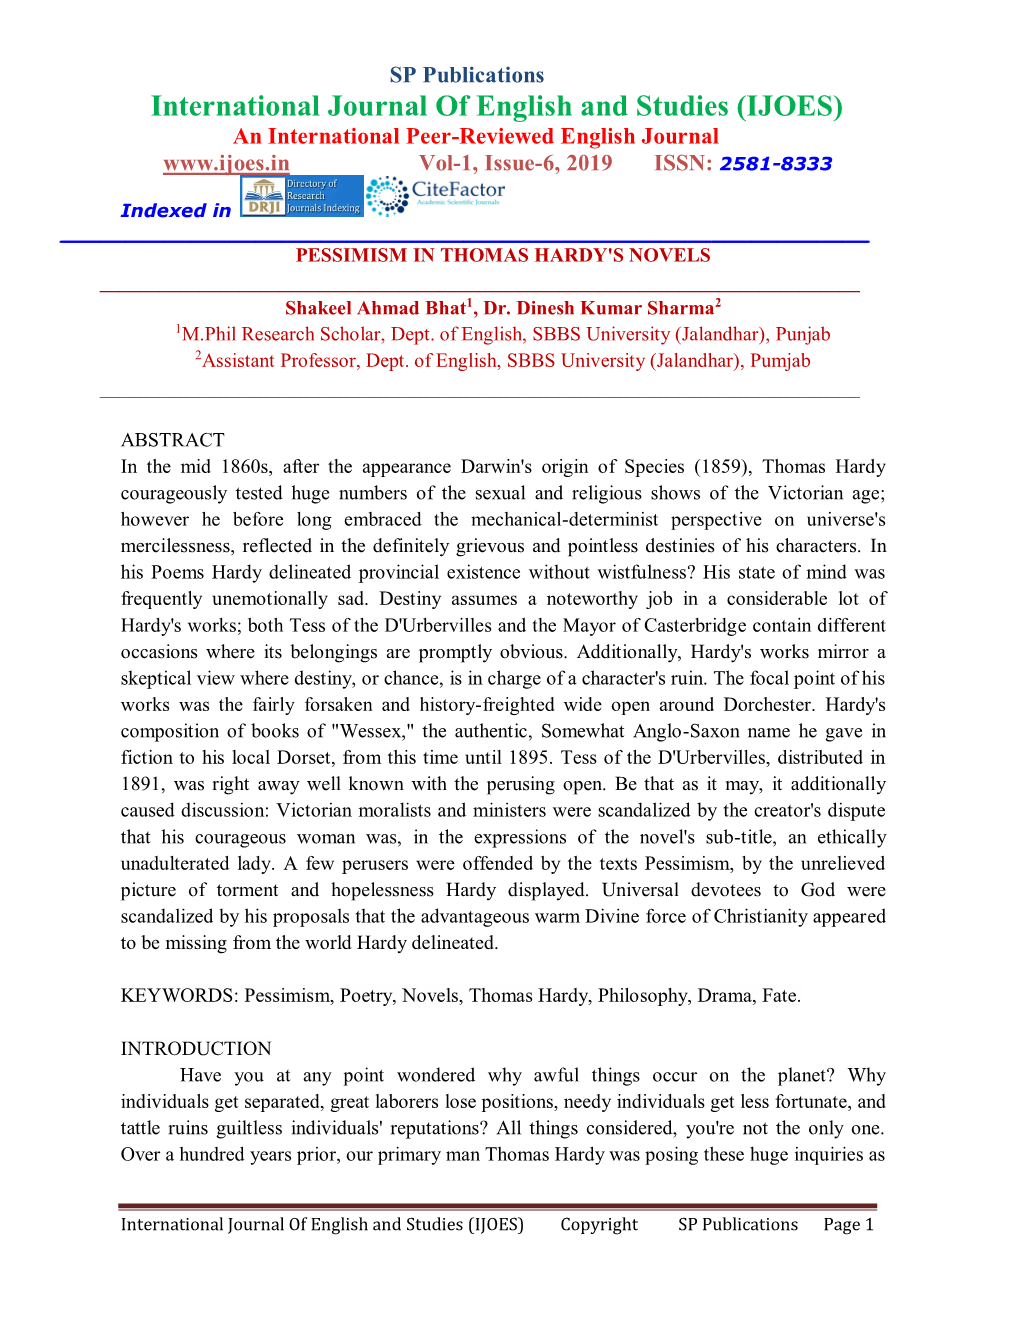 International Journal of English and Studies (IJOES) an International Peer-Reviewed English Journal Vol-1, Issue-6, 2019 ISSN: 2581-8333